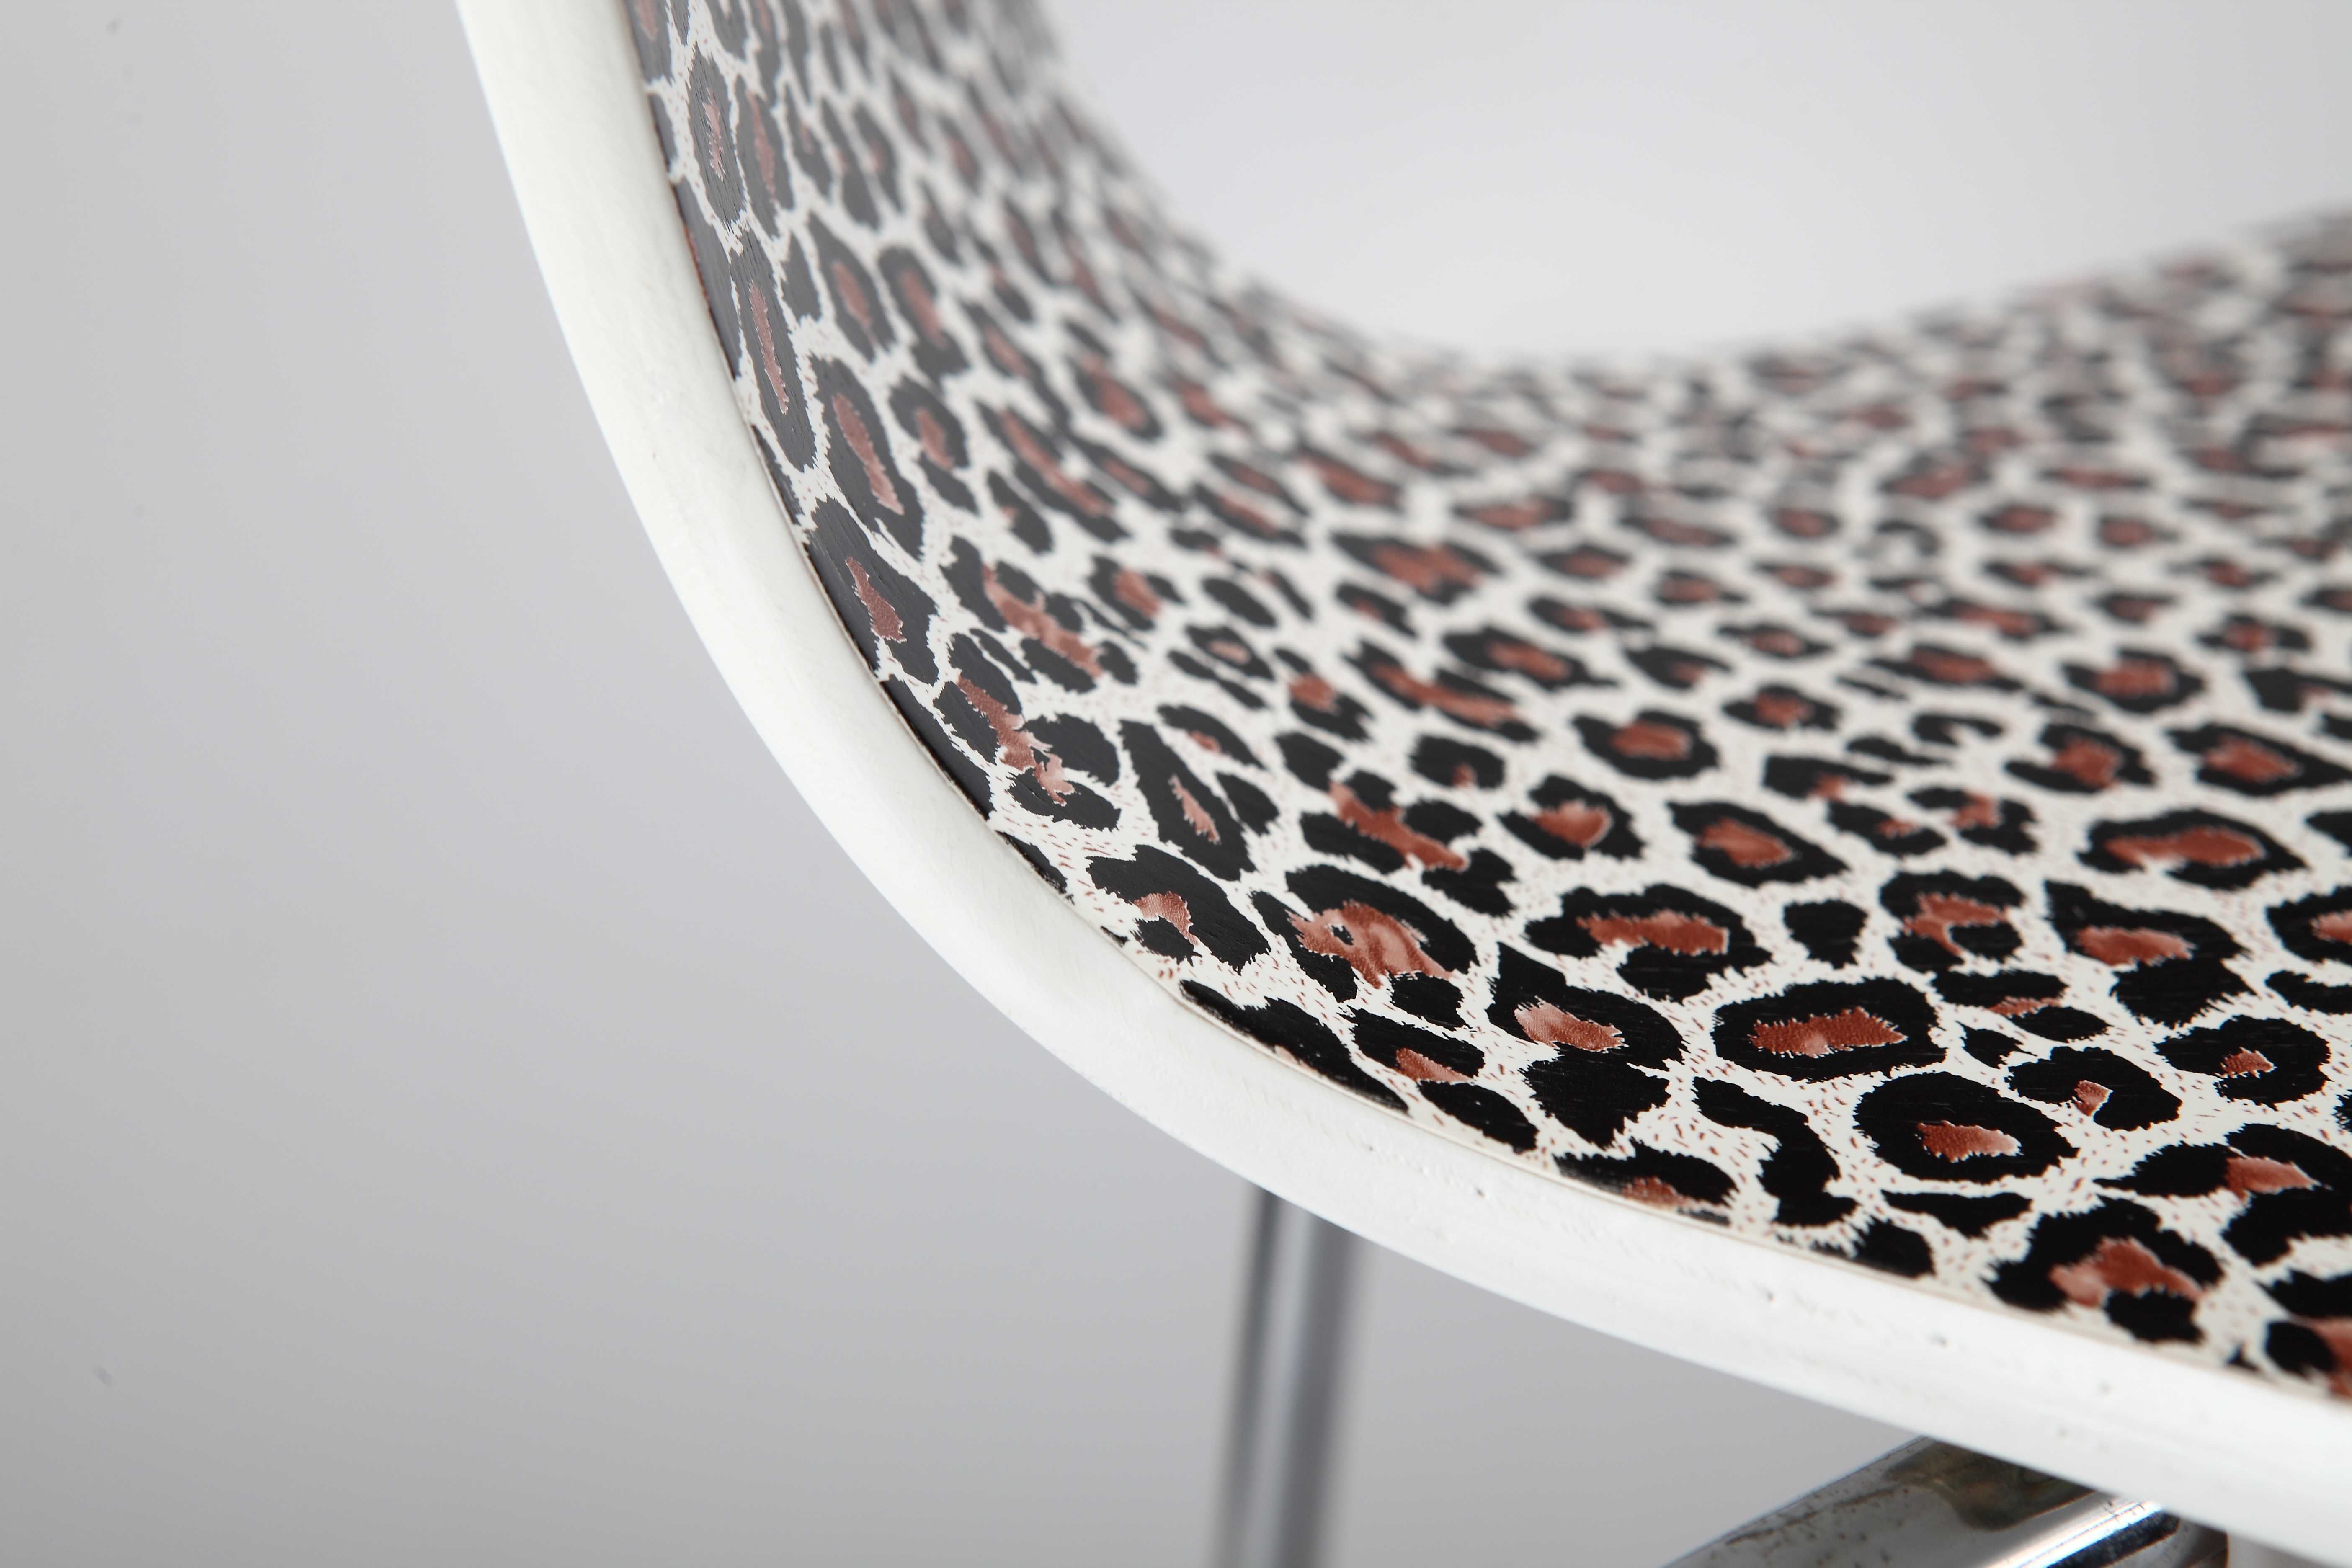 Tranfer Printing Product - Wood Chair